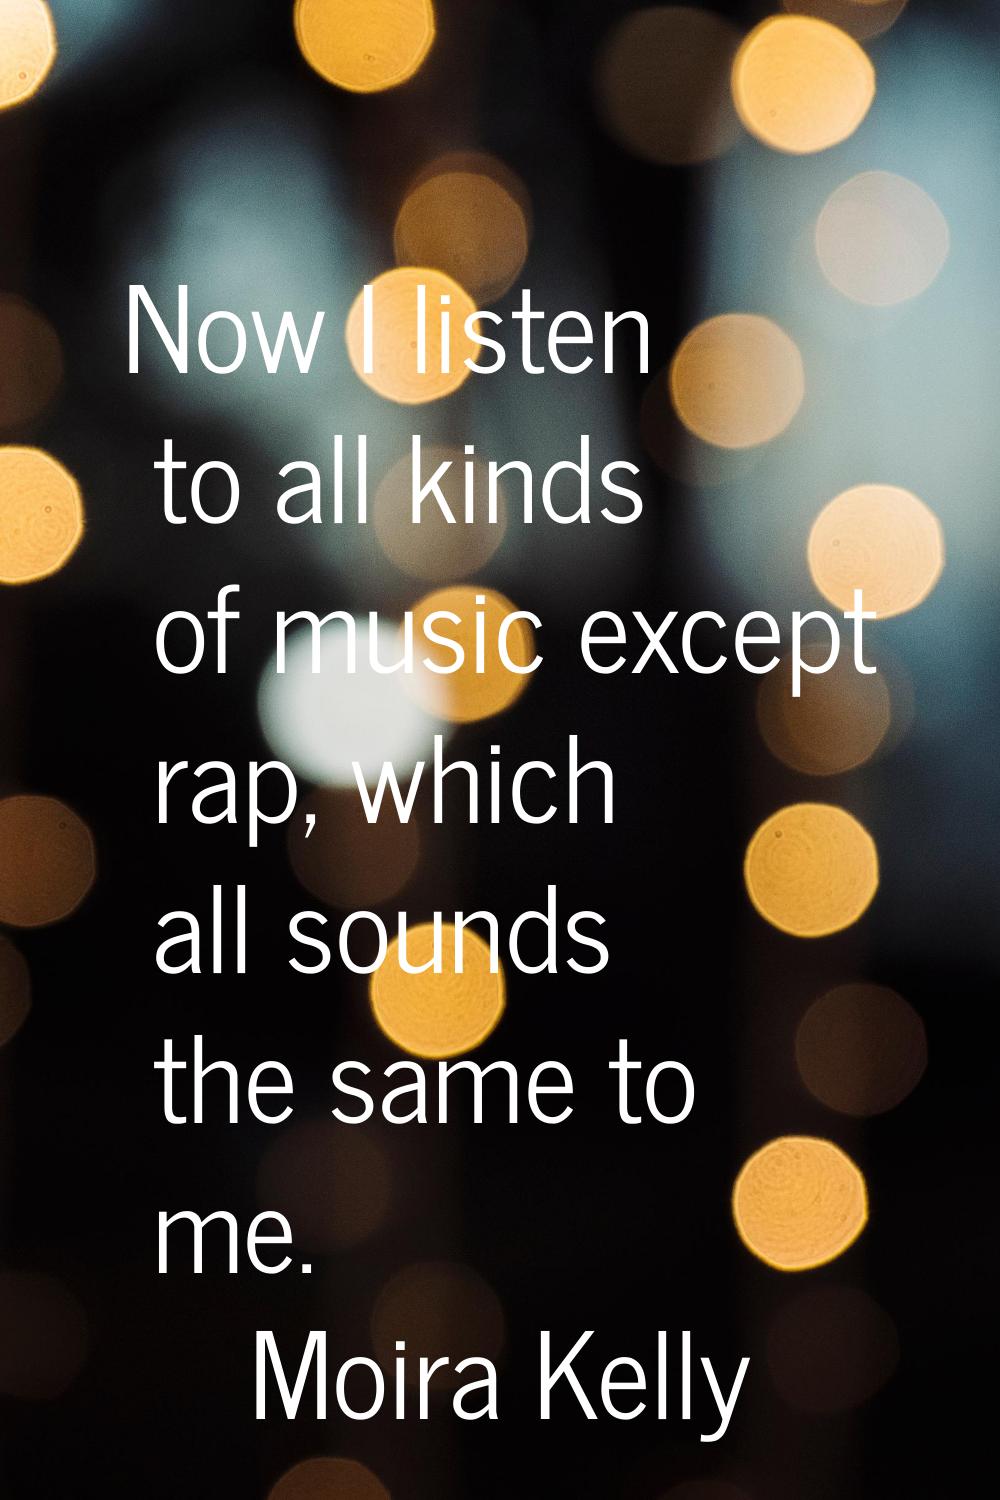 Now I listen to all kinds of music except rap, which all sounds the same to me.